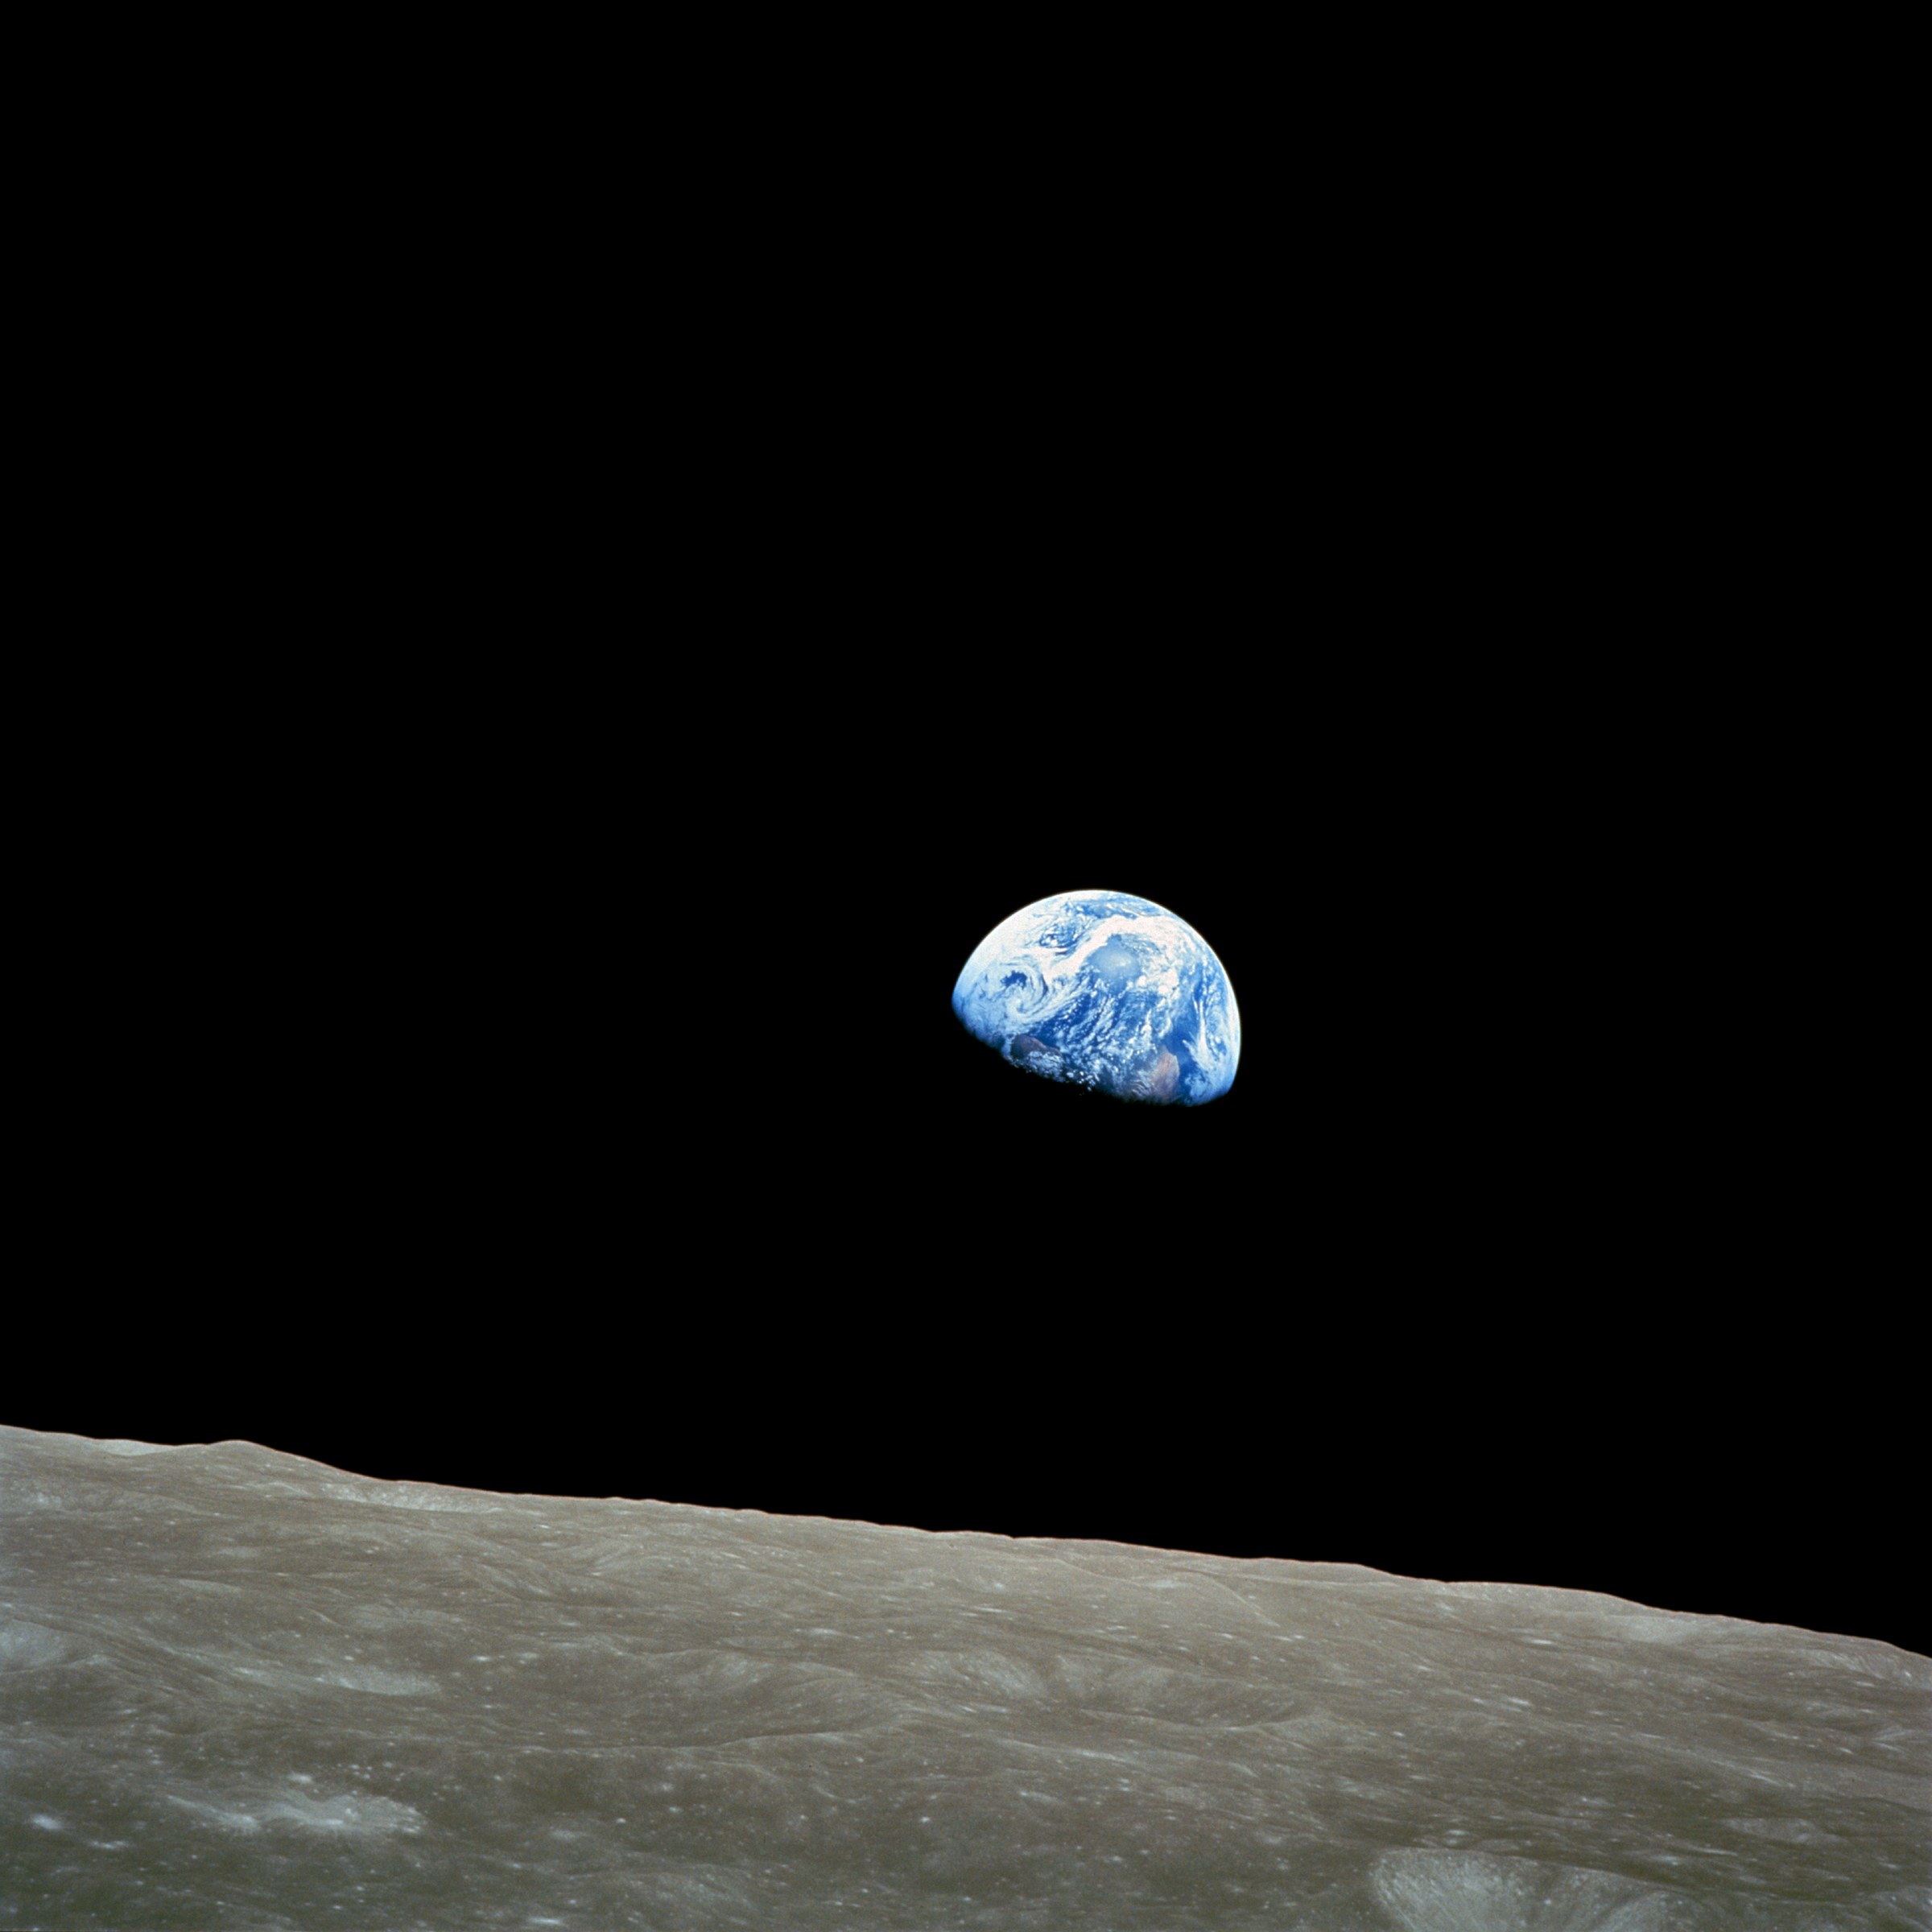 Earthrise, by astronaut William Anders/Apollo 8. Credit: NASA/Bill Anders Earthrise, by astronaut William Anders/Apollo 8. Credit: NASA/Bill Anders